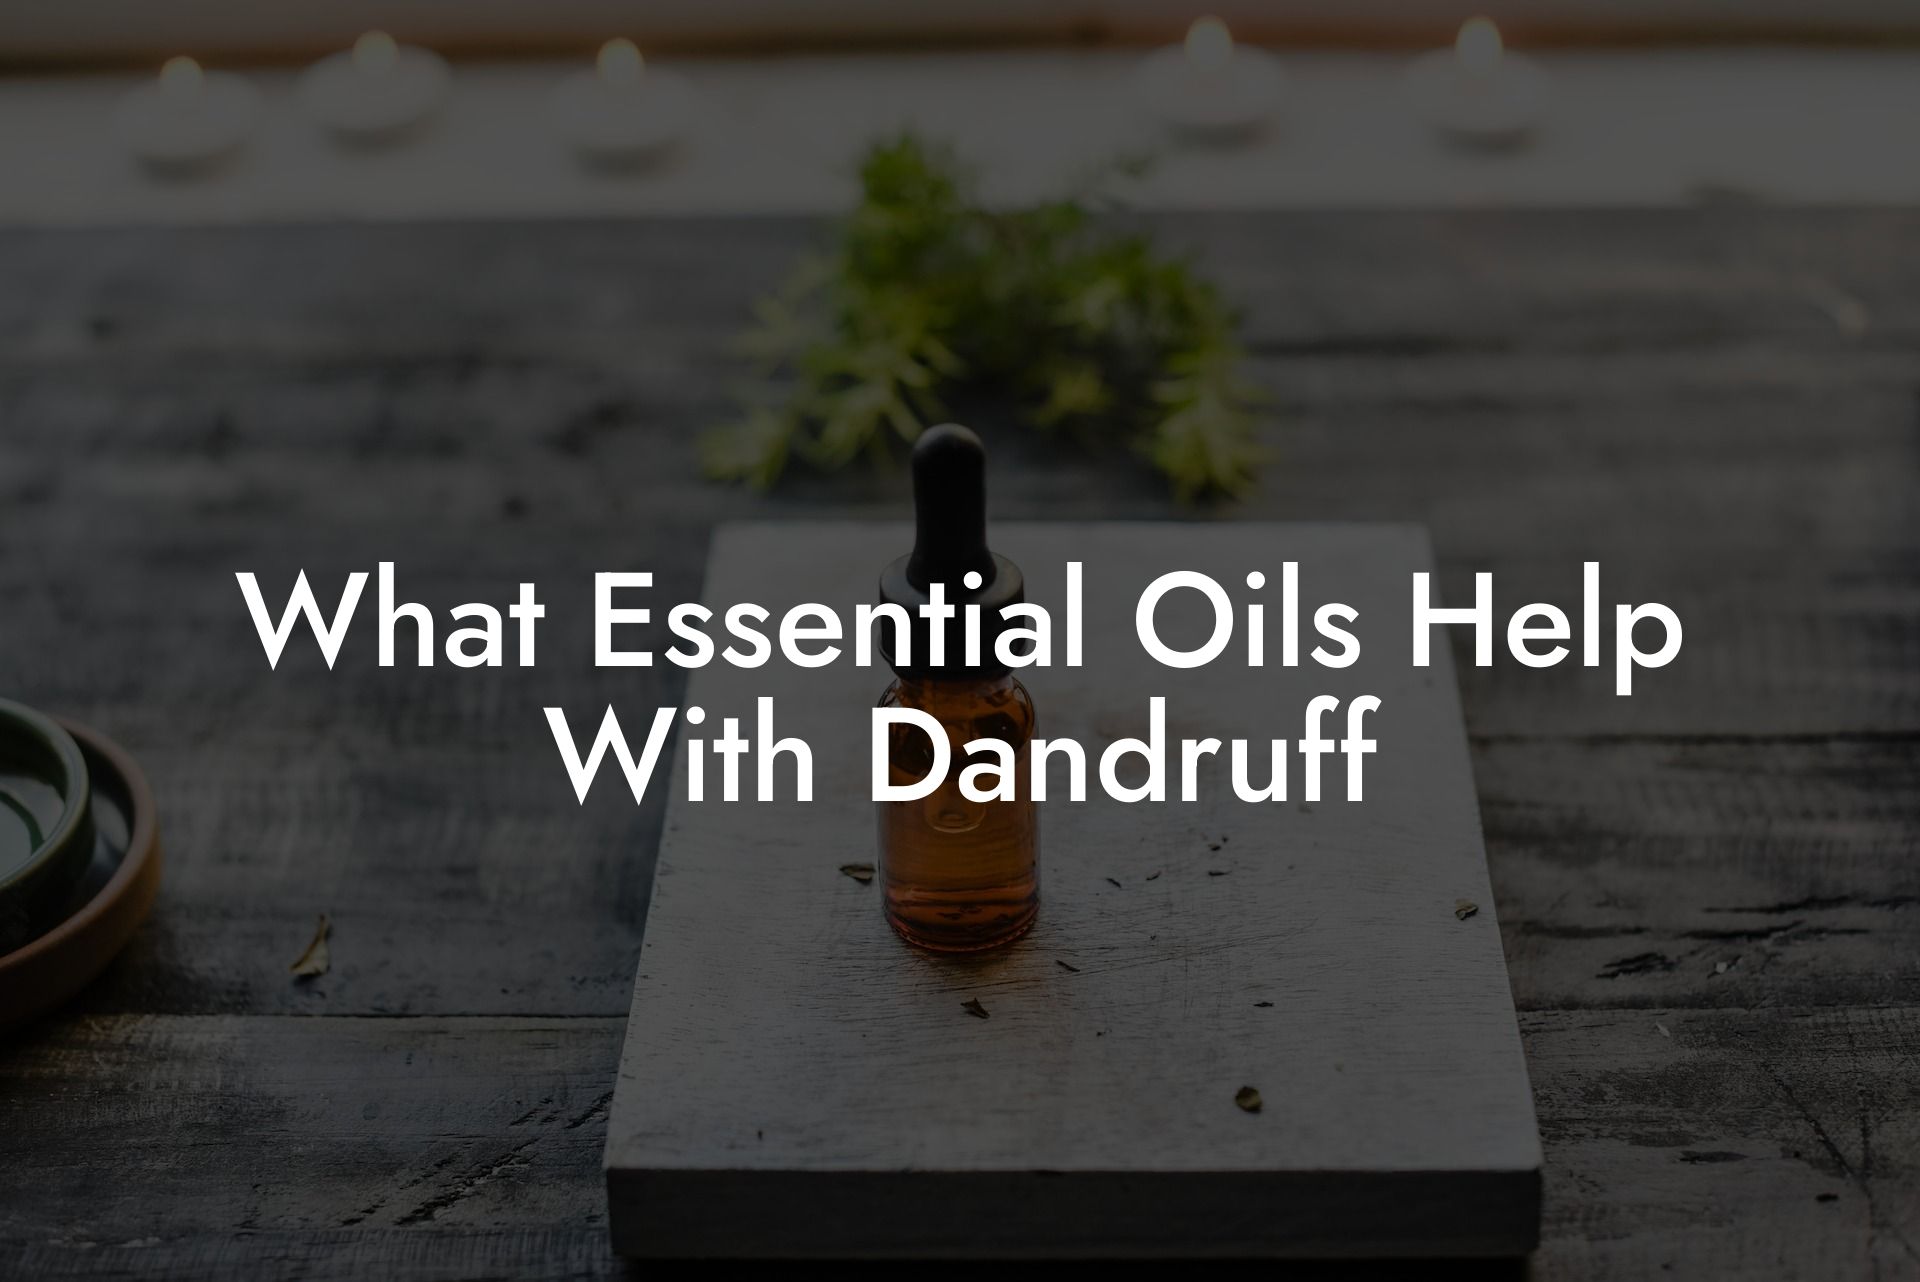 What Essential Oils Help With Dandruff